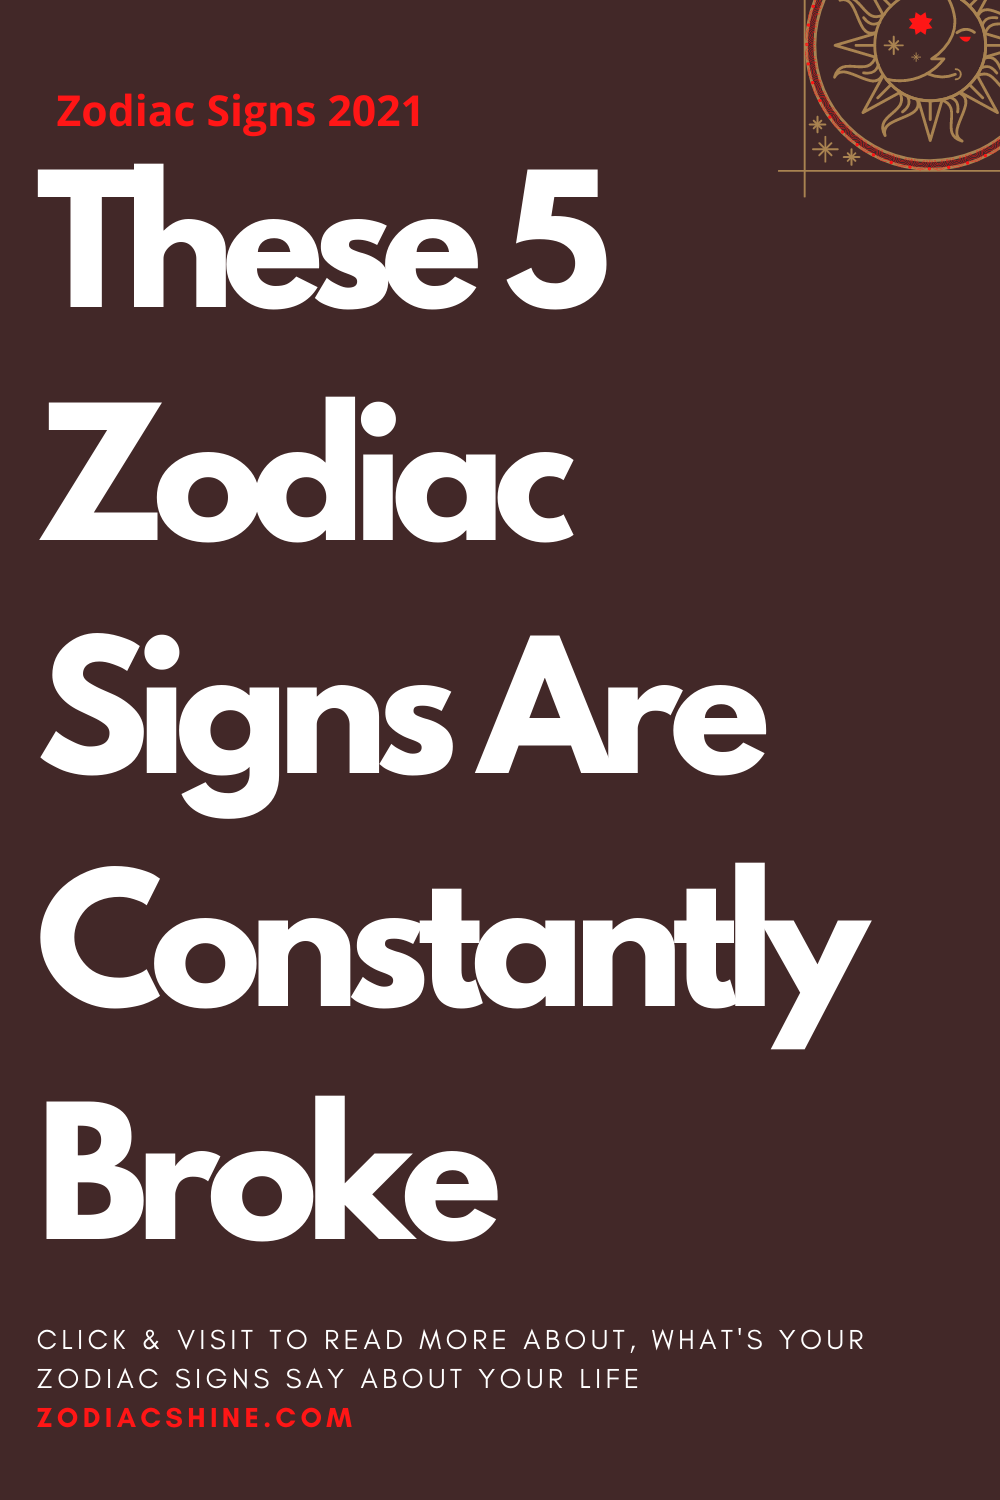 These 5 Zodiac Signs Are Constantly Broke